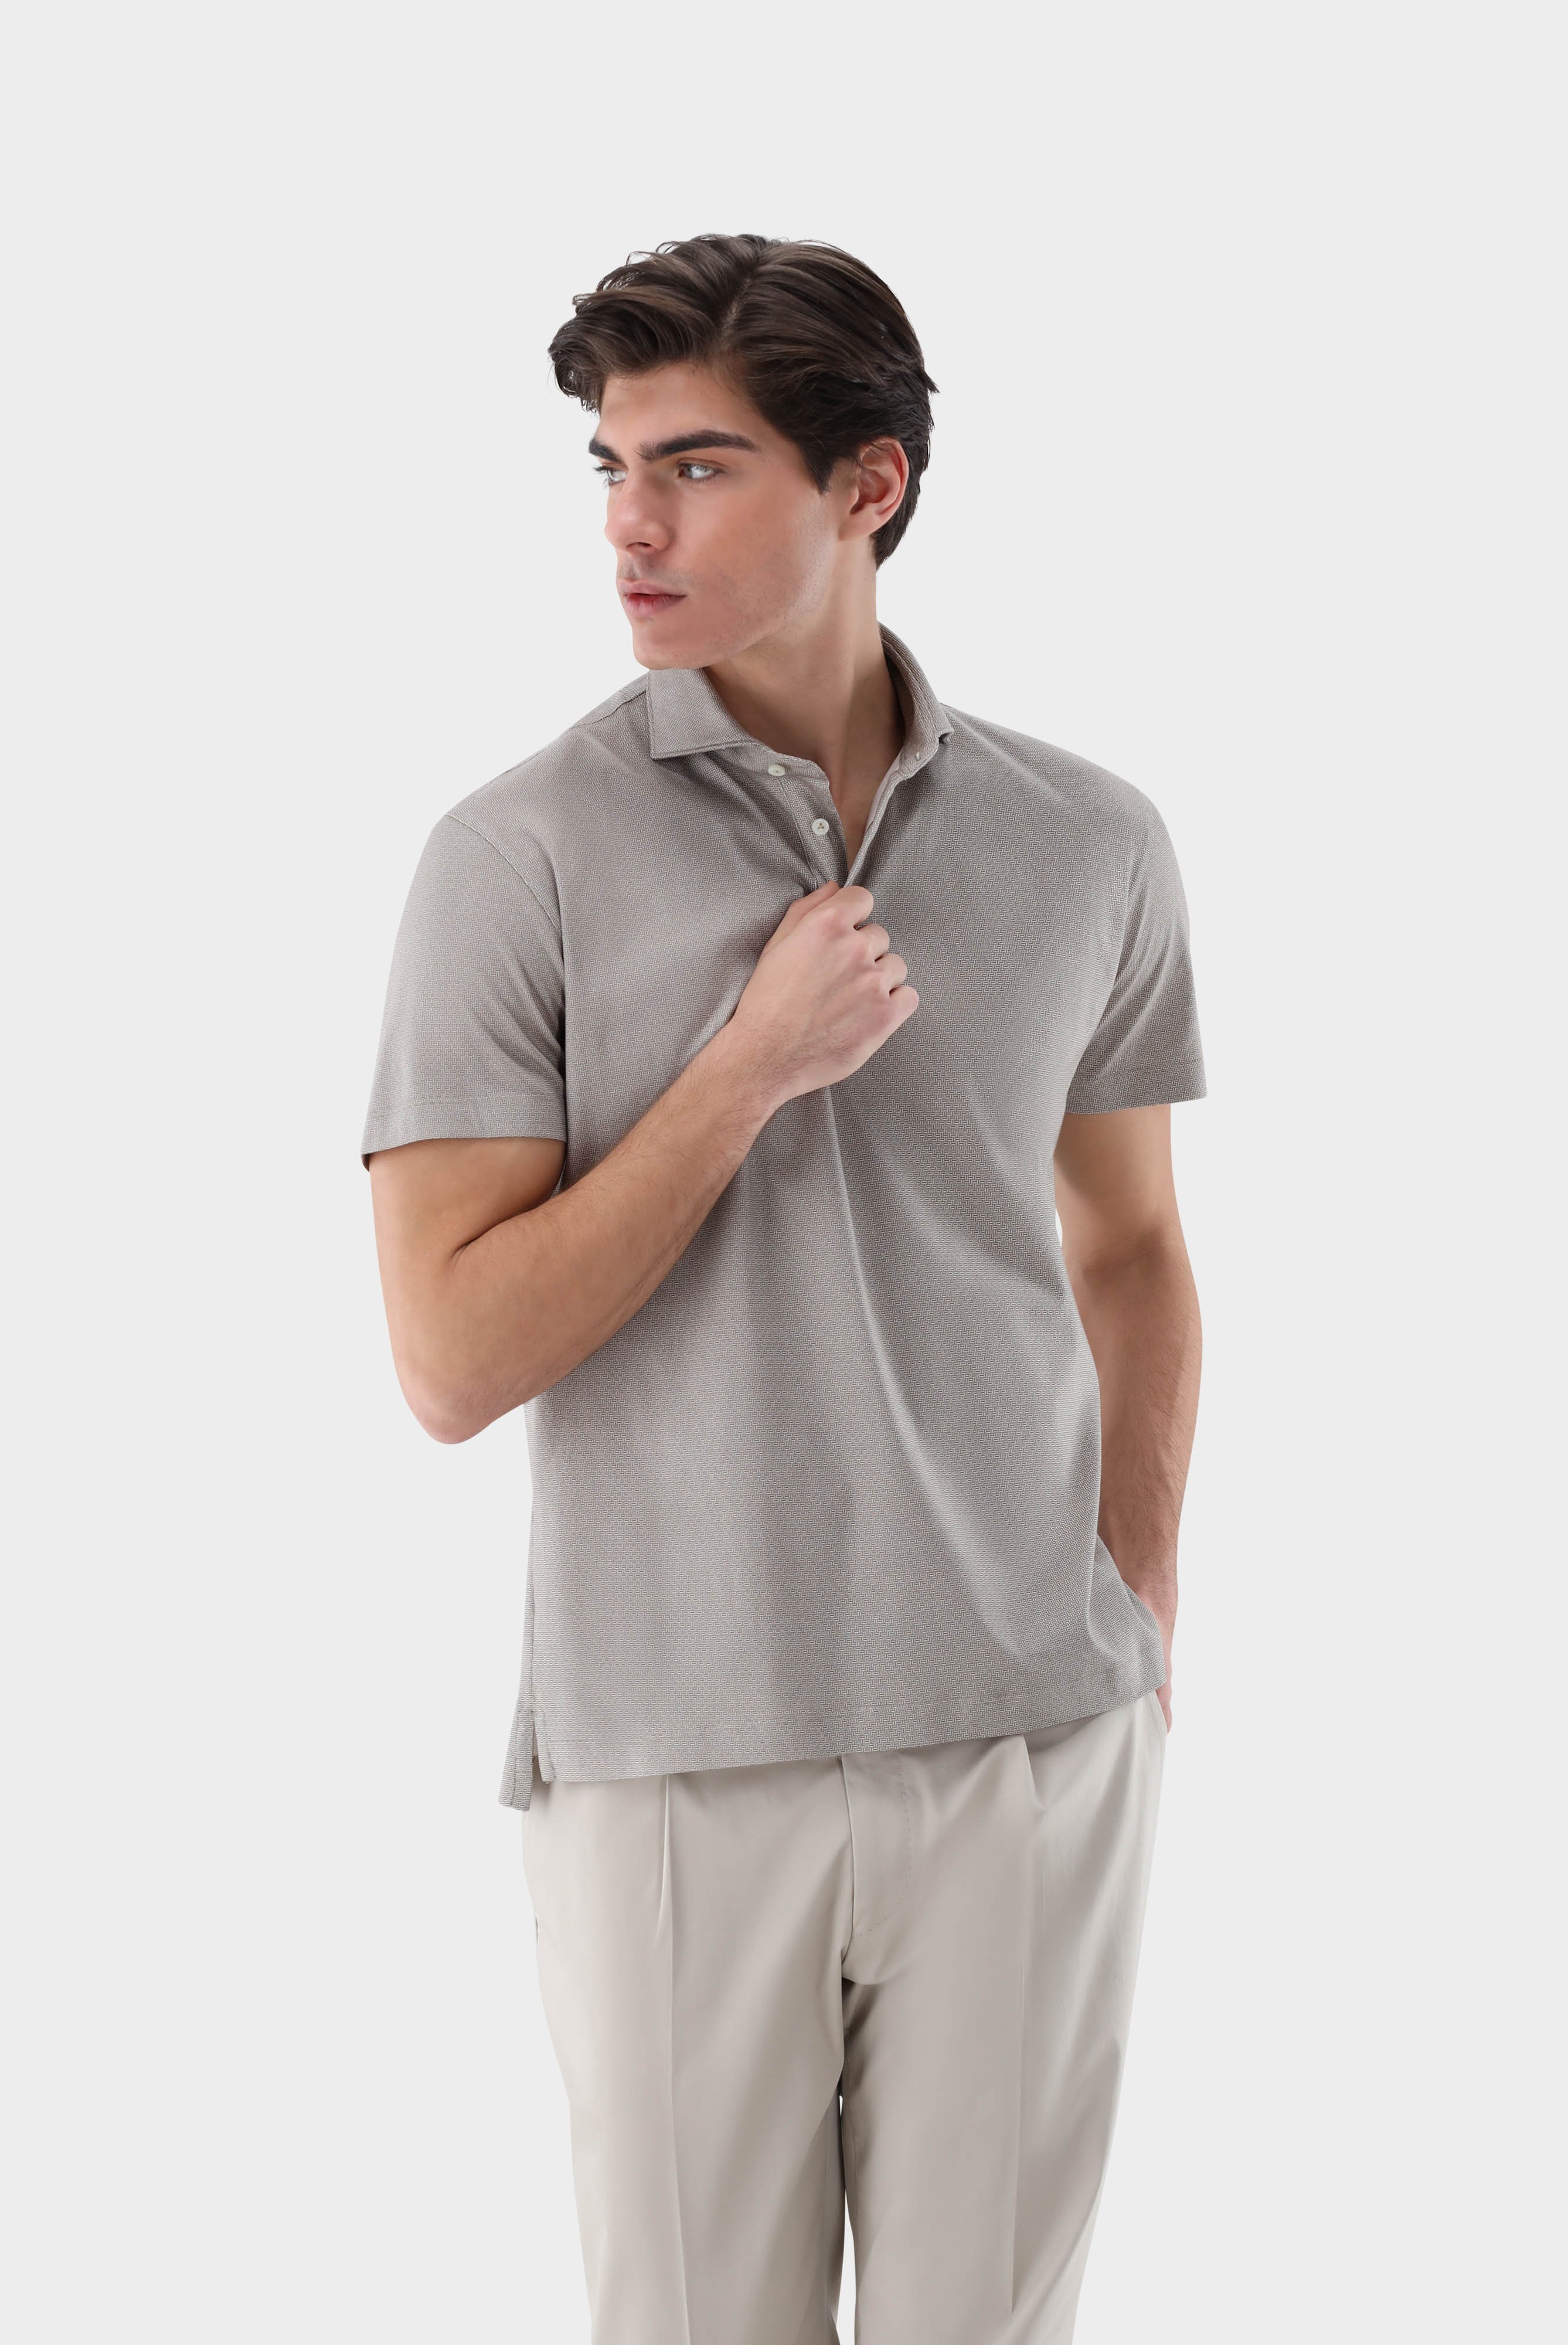 Jersey Polo Shirt with Micro Print made of Swiss Cotton